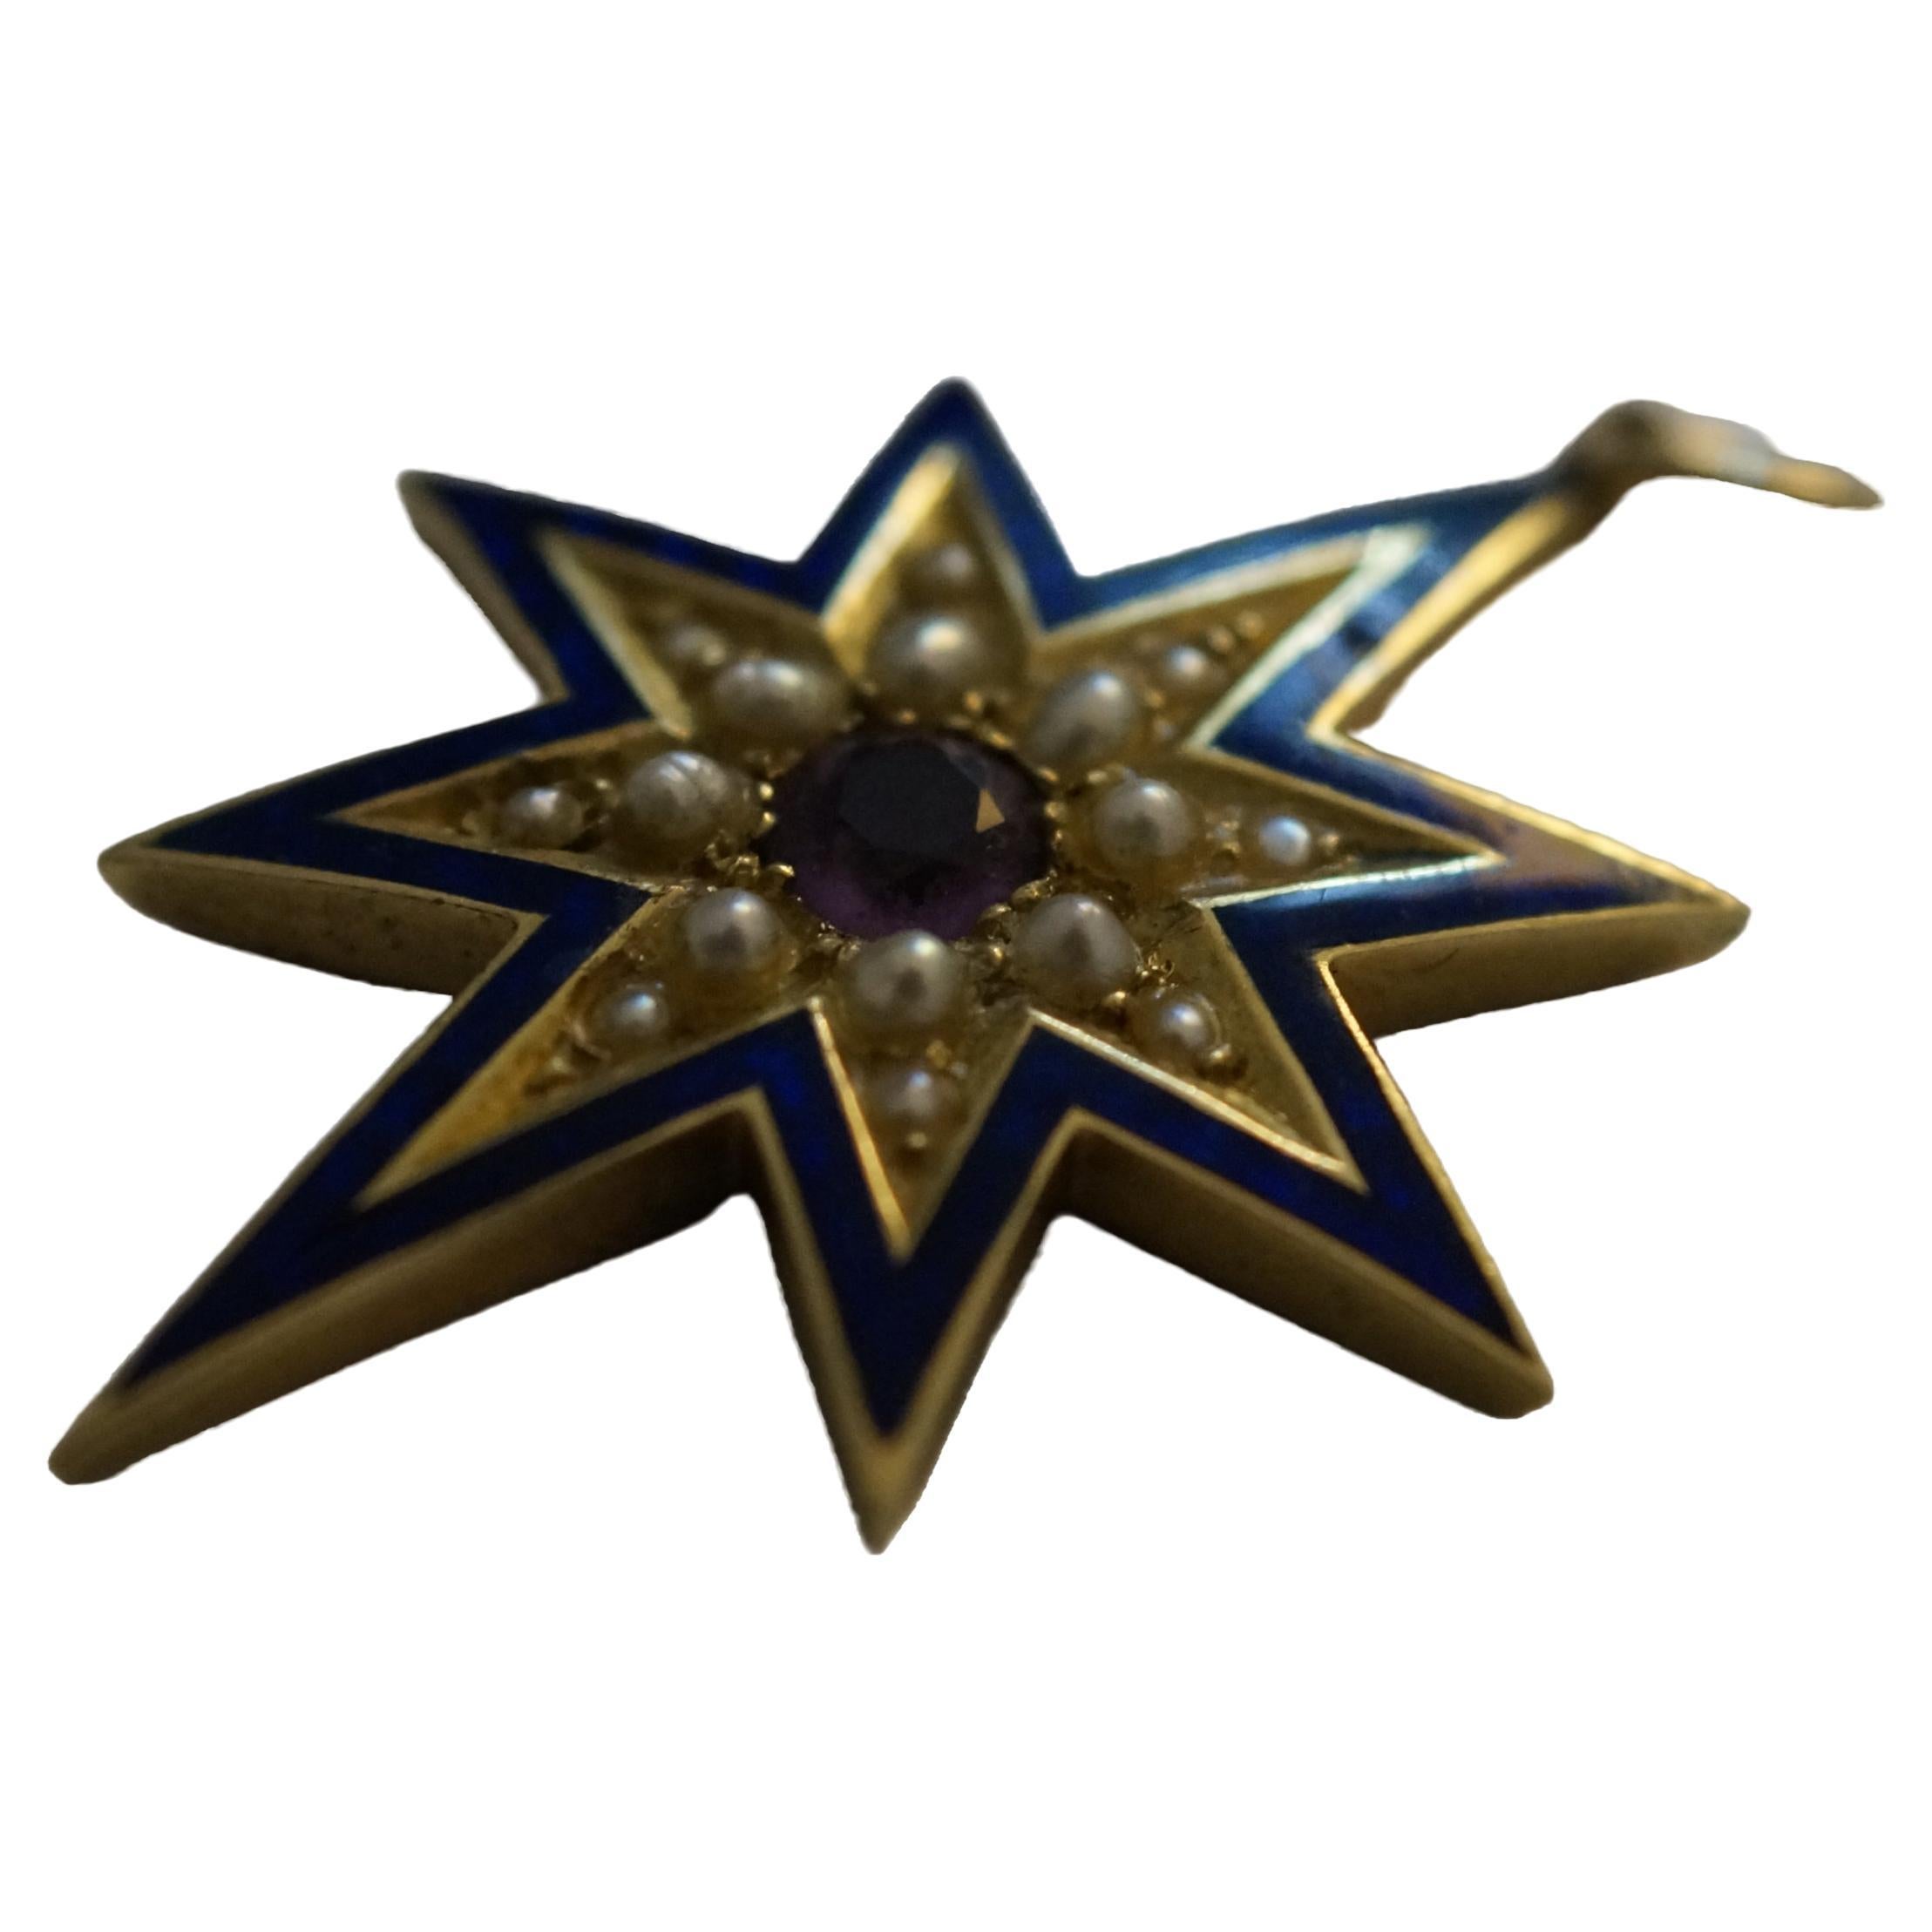 A sensational and impressive Victorian star pendant crafted in 9 carat gold, with vivid royal blue enamel work, seed pearls and a brilliant central amethyst stone. This beautiful antique medallion is circa 1845. 

14 seed pearls of excellent quality